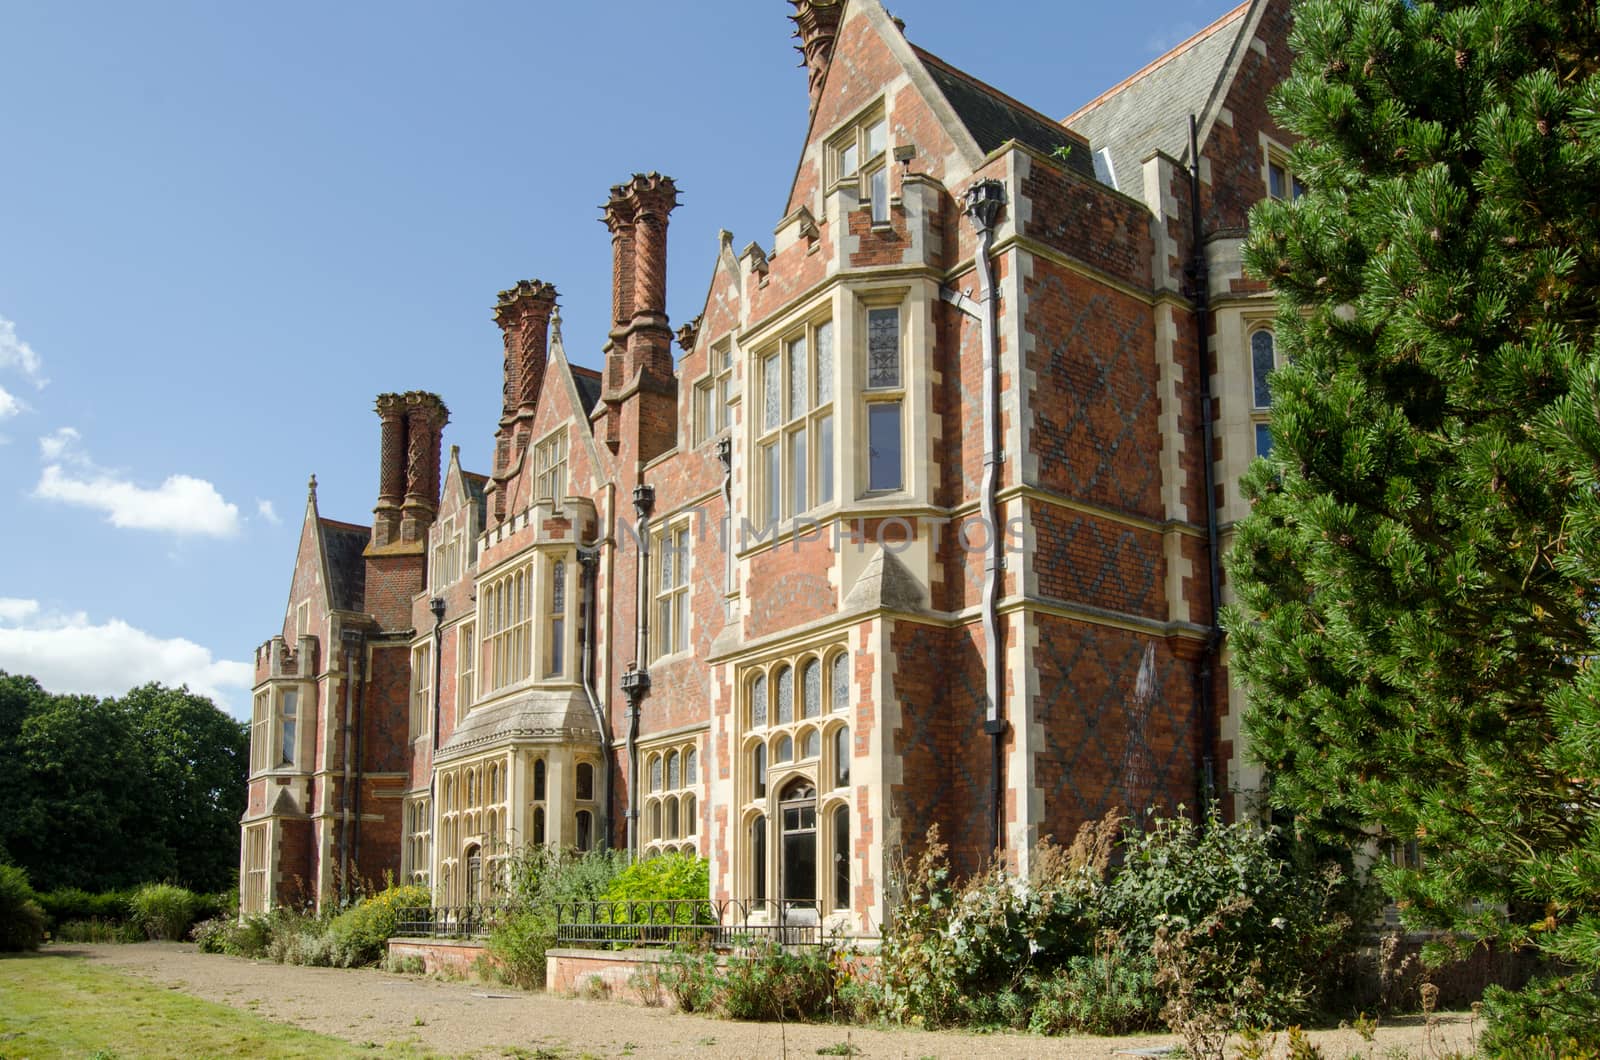 Detail of the South facing elevation of Aldermaston Manor, Berkshire.  The historic stately home, which was extensively rebuilt in the Victorian era,  dates from Stuart times and is now empty, awaiting redevelopment.